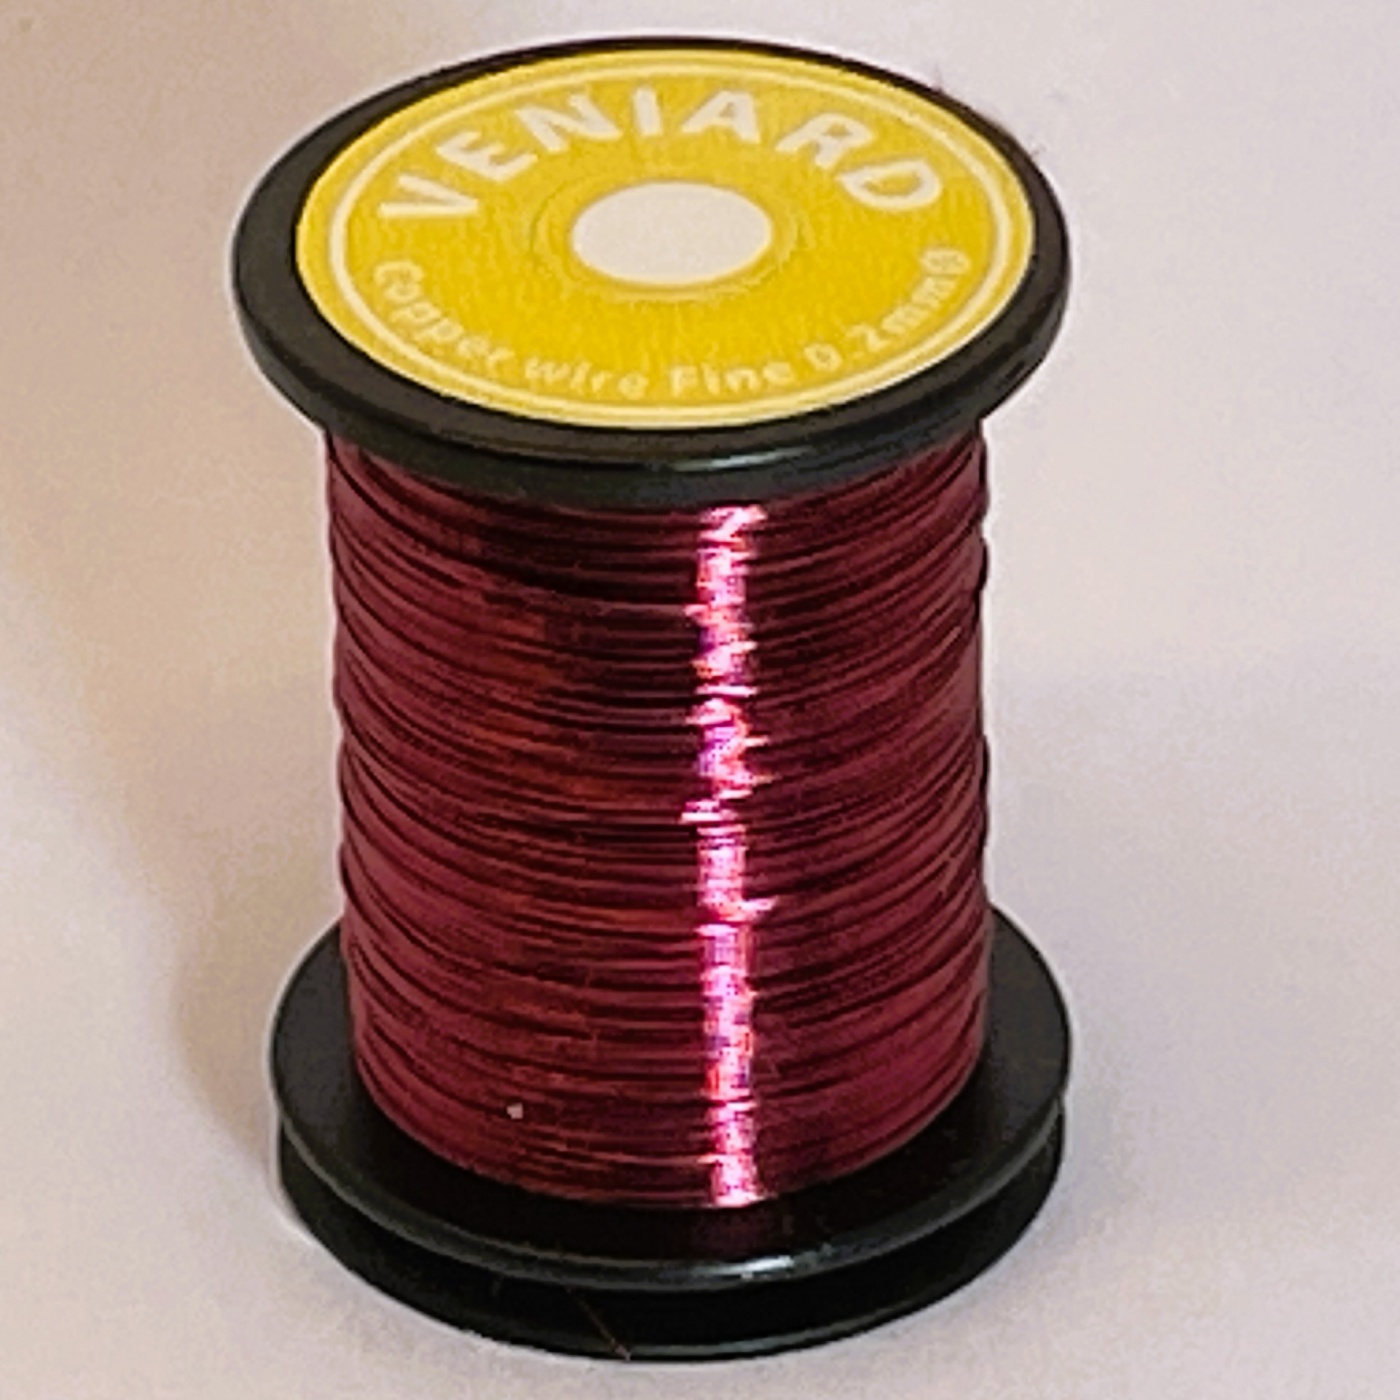 Veniard Coloured Copper Wire Fine 0.2mm Claret Fly Tying Materials (Product Length 14.2Yds / 13m)